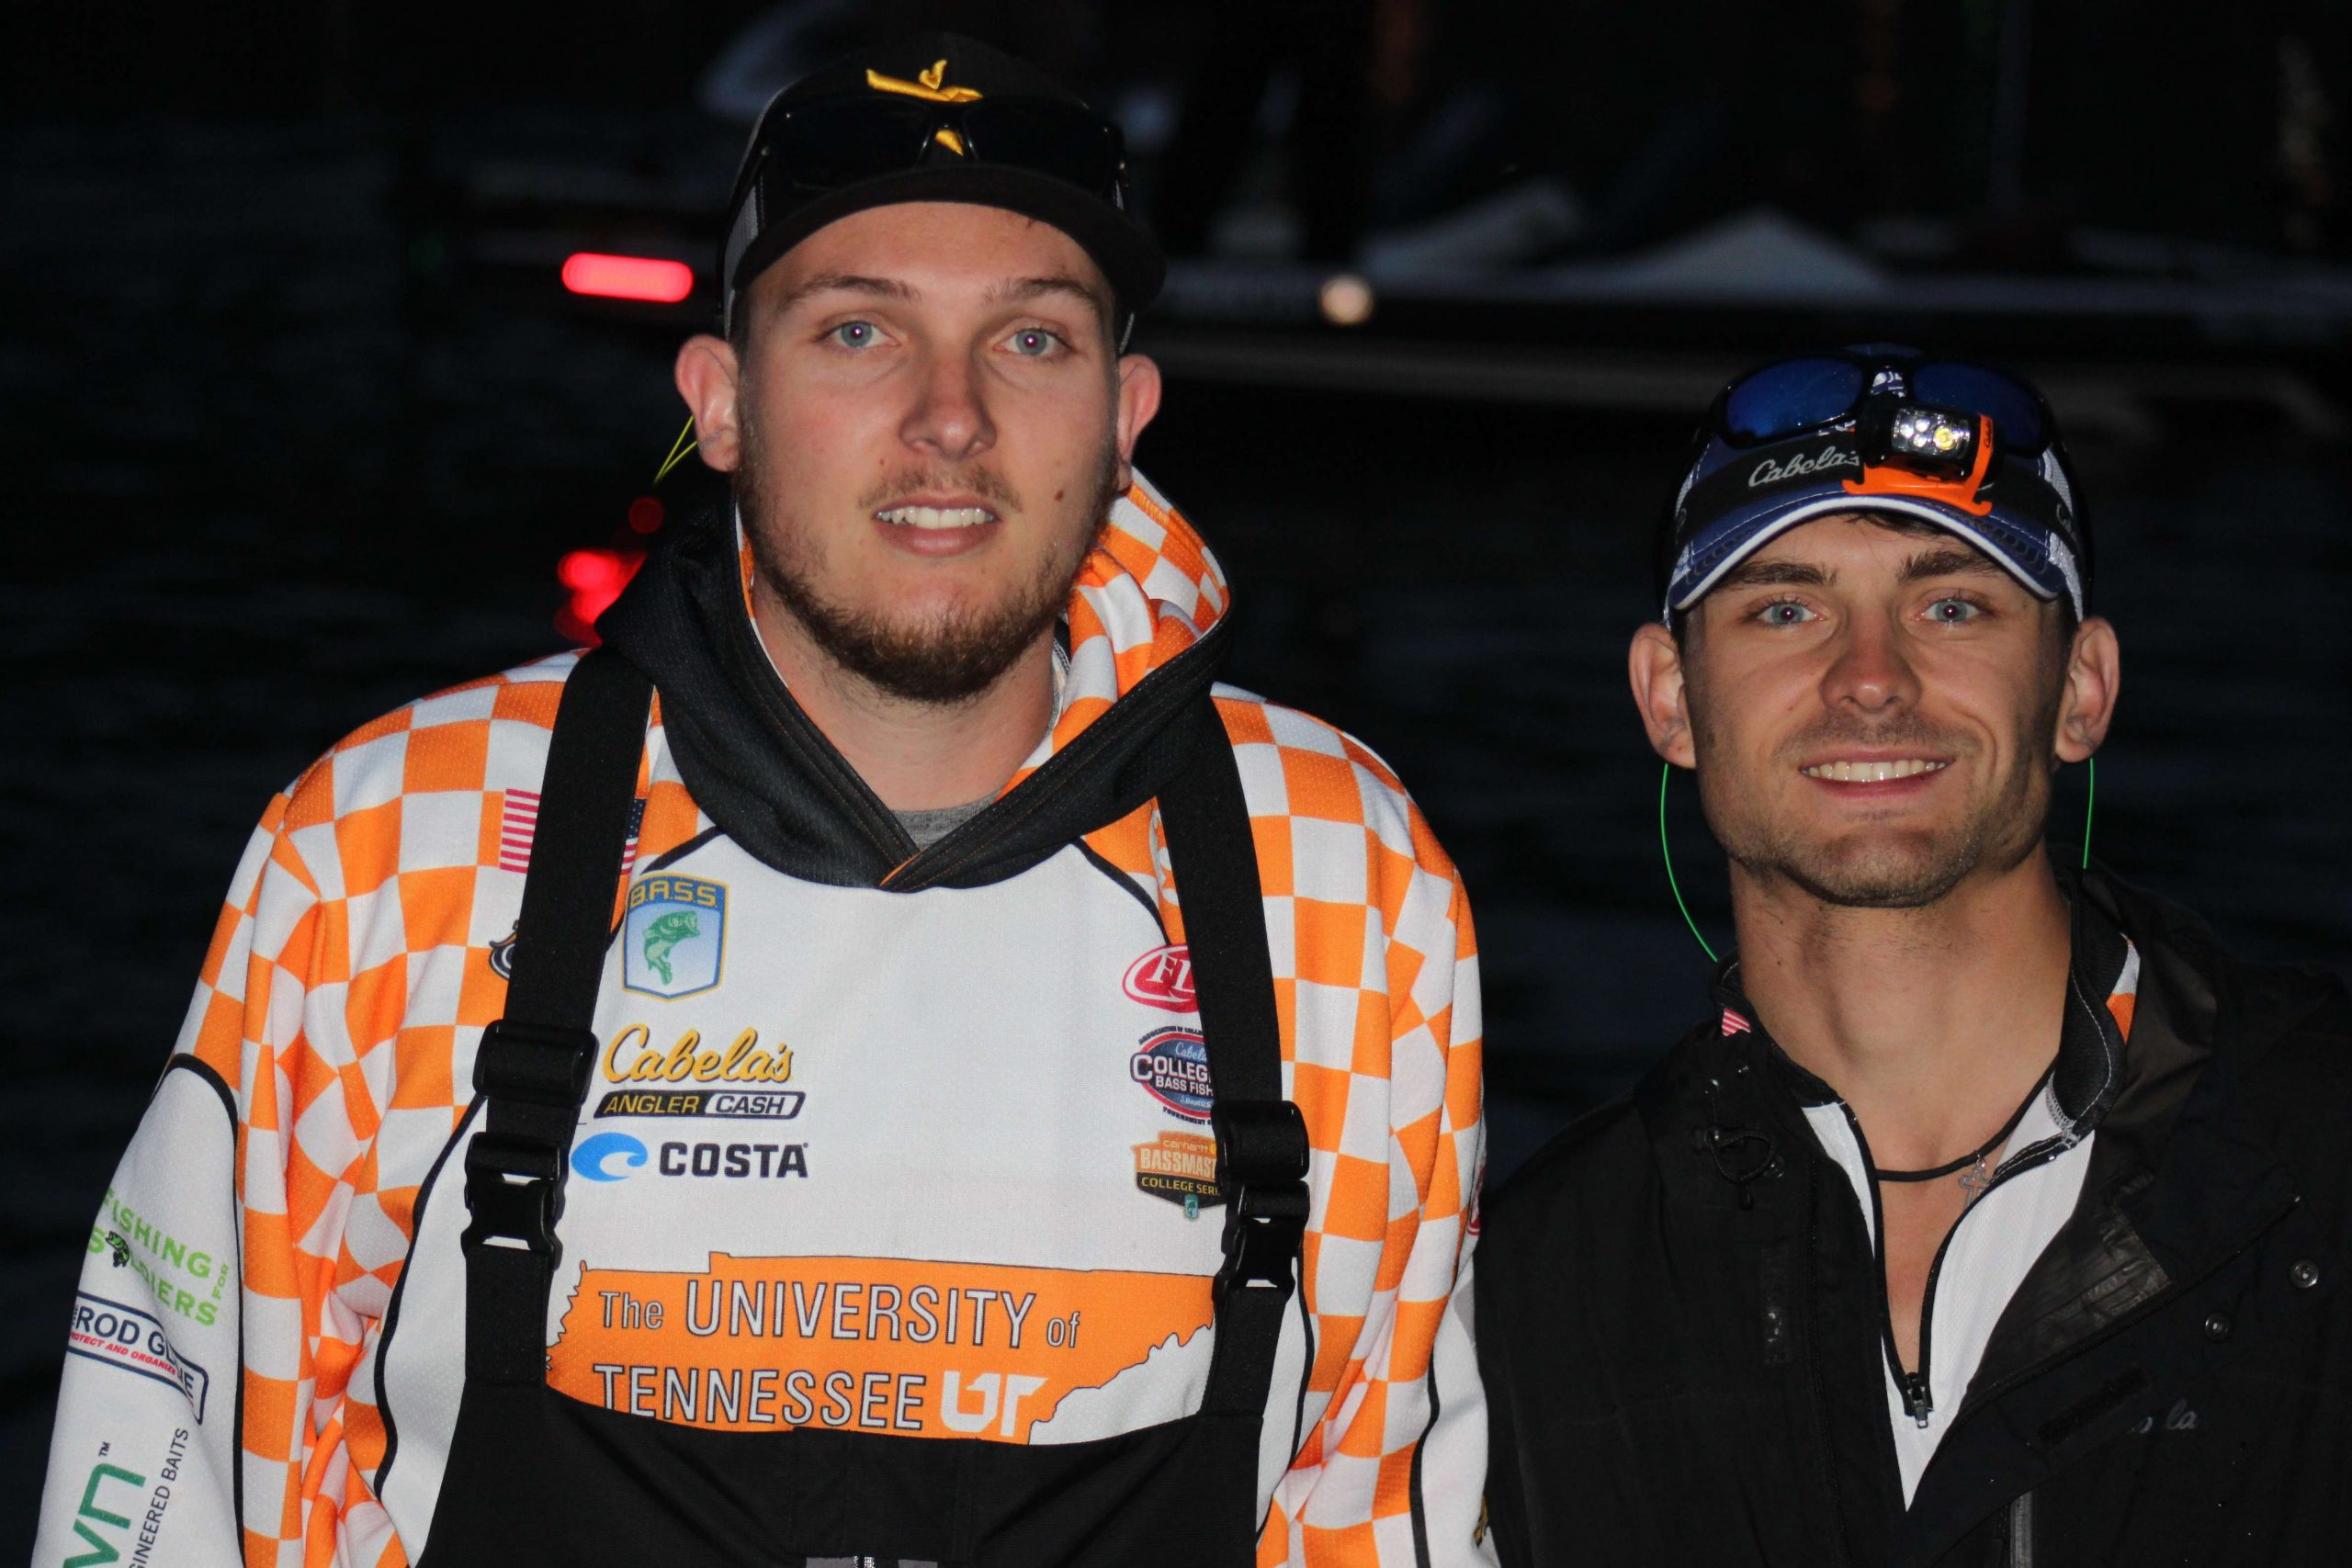 The group has to start somewhere and so it does. Here are the guys from Boat 1 â Isaac Hillard and Cory Hensley from the University of Tennessee.